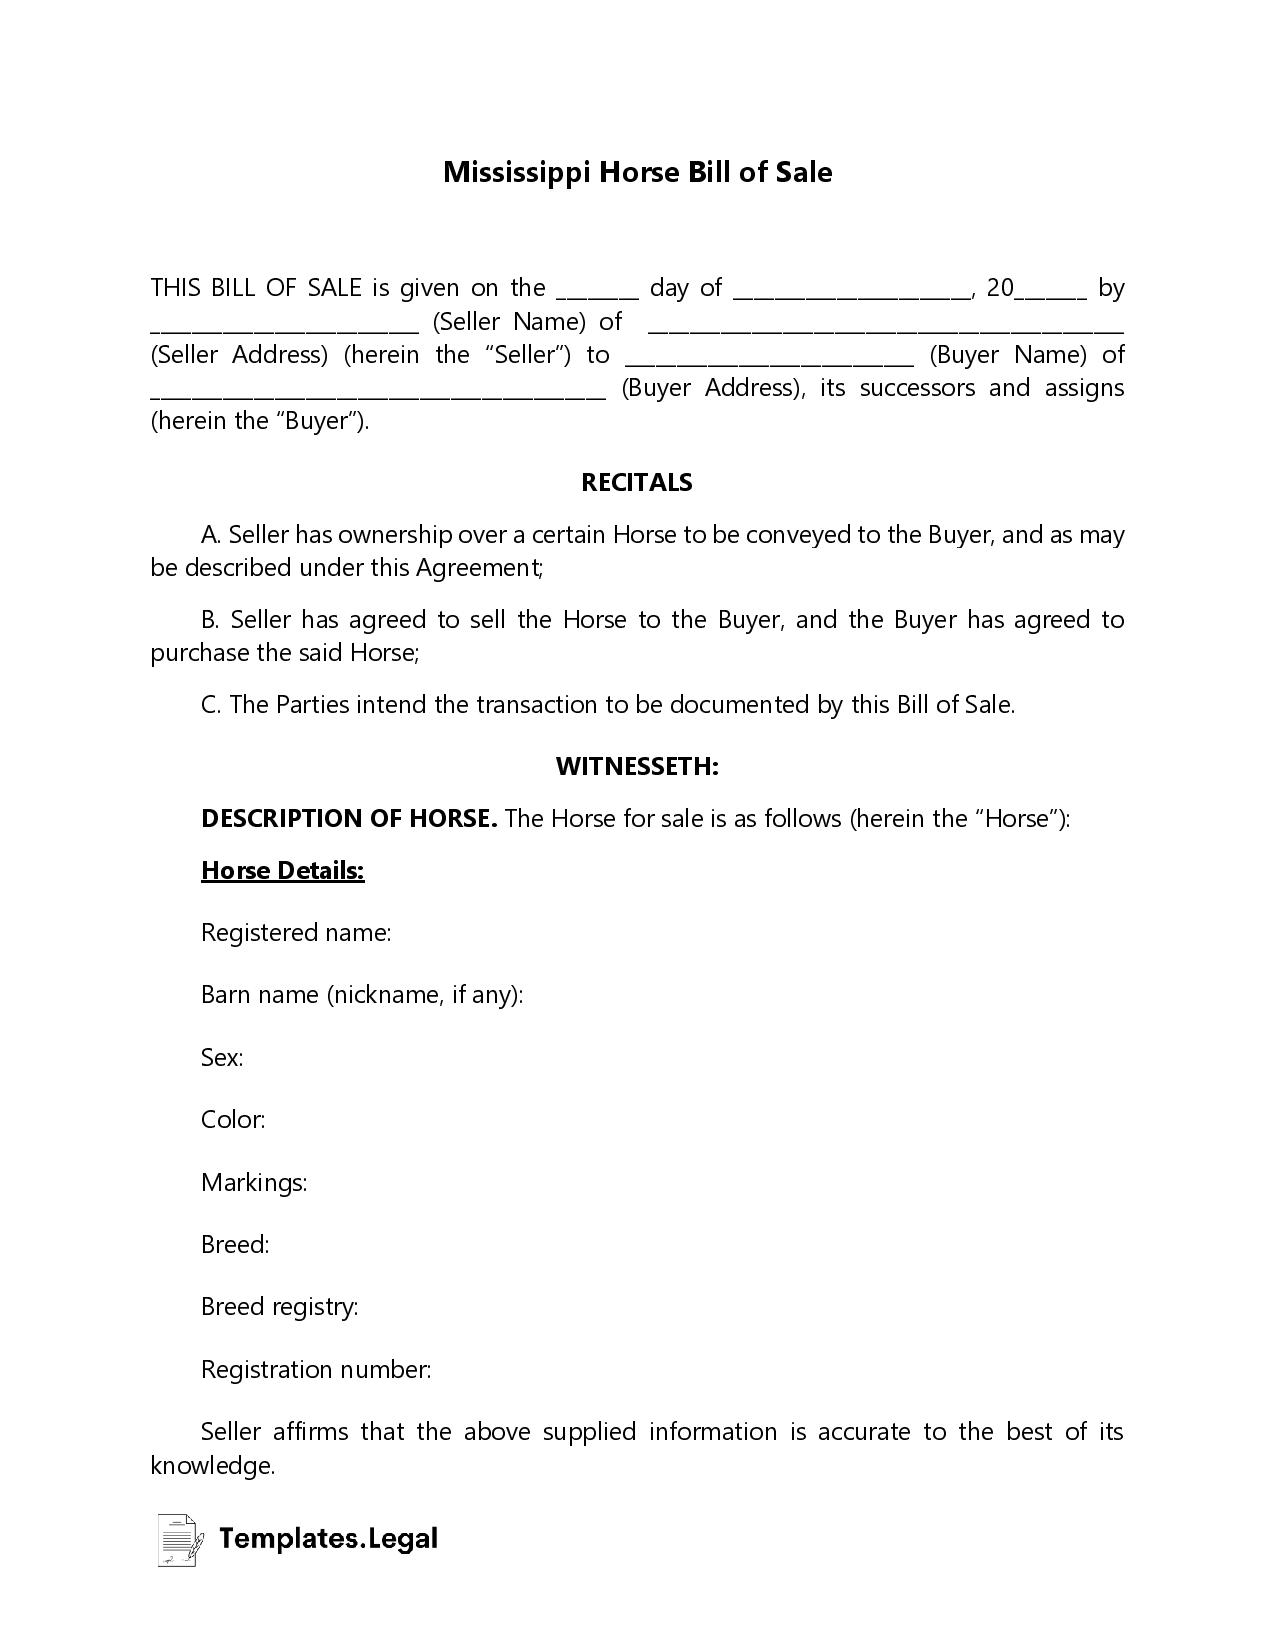 Mississippi Horse Bill of Sale - Templates.Legal